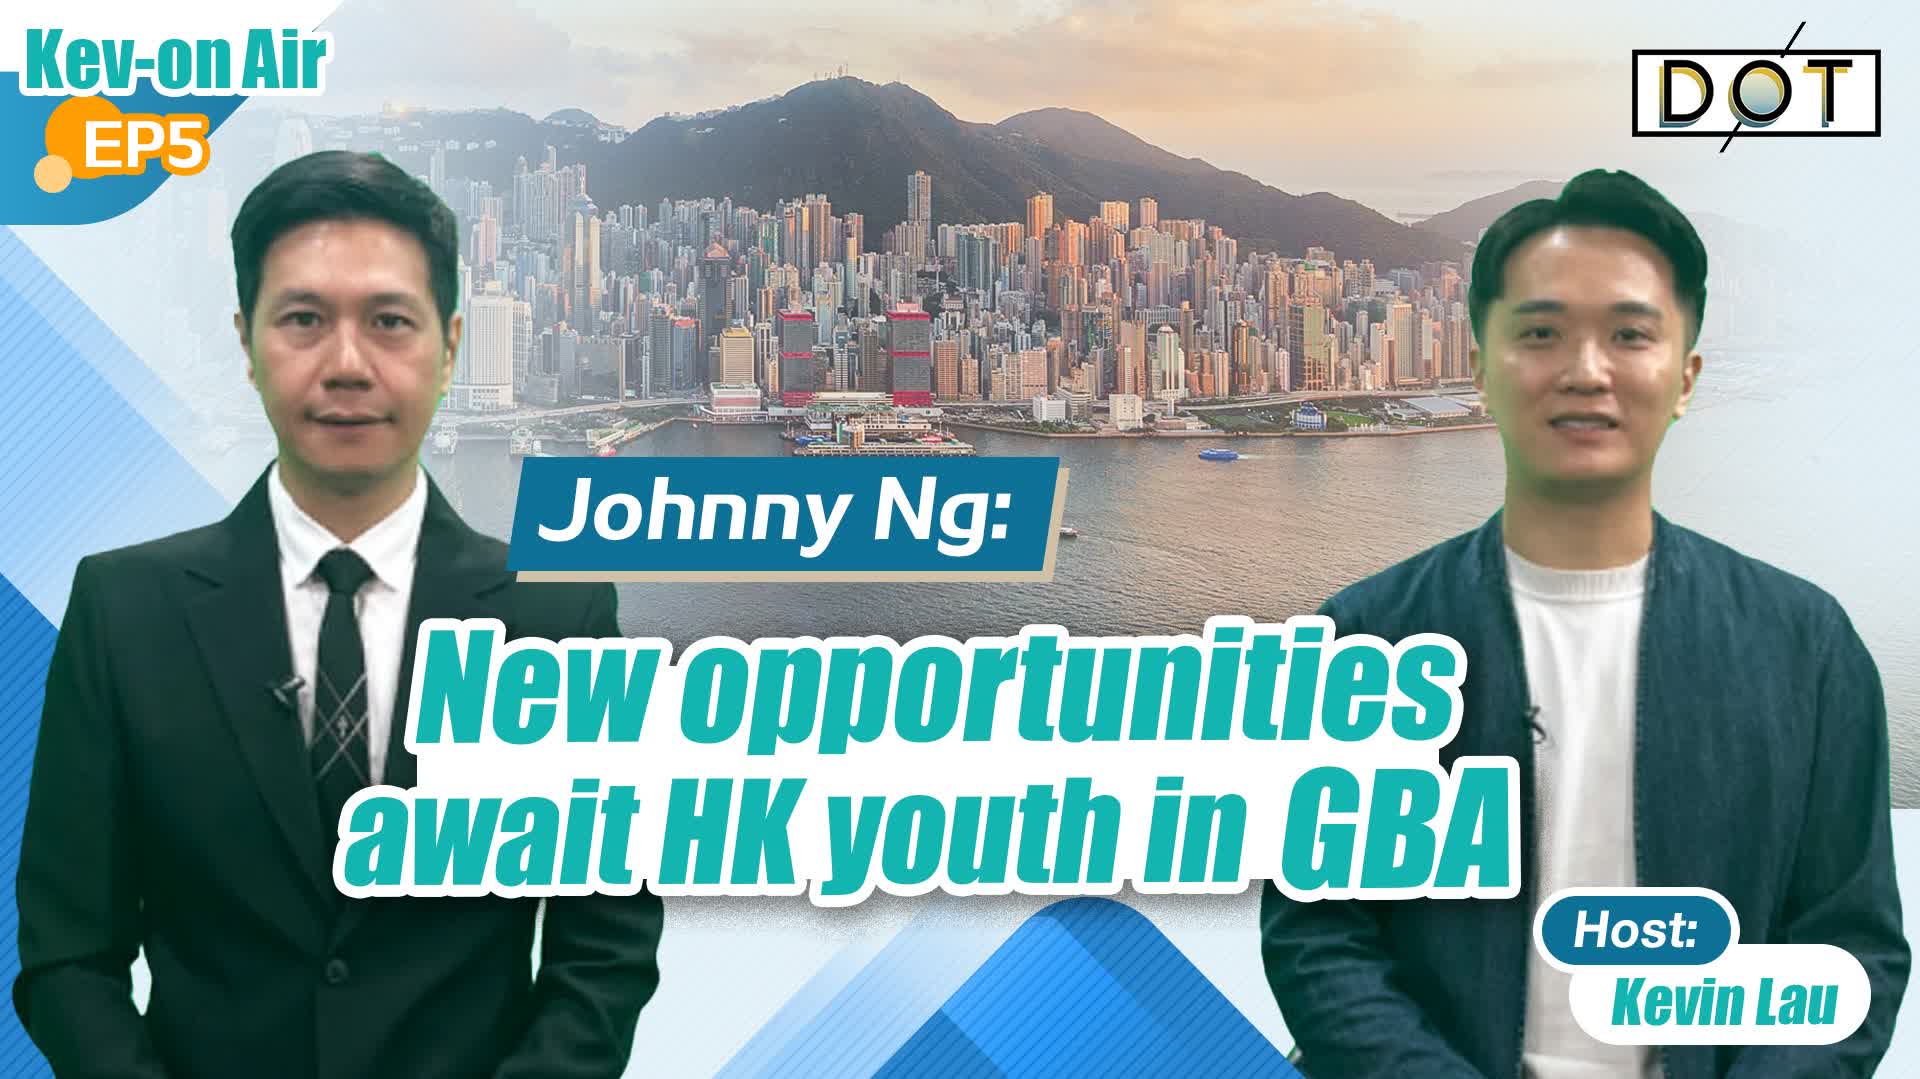 Kev-On Air EP5 | Johnny Ng: New opportunities await HK youth in GBA